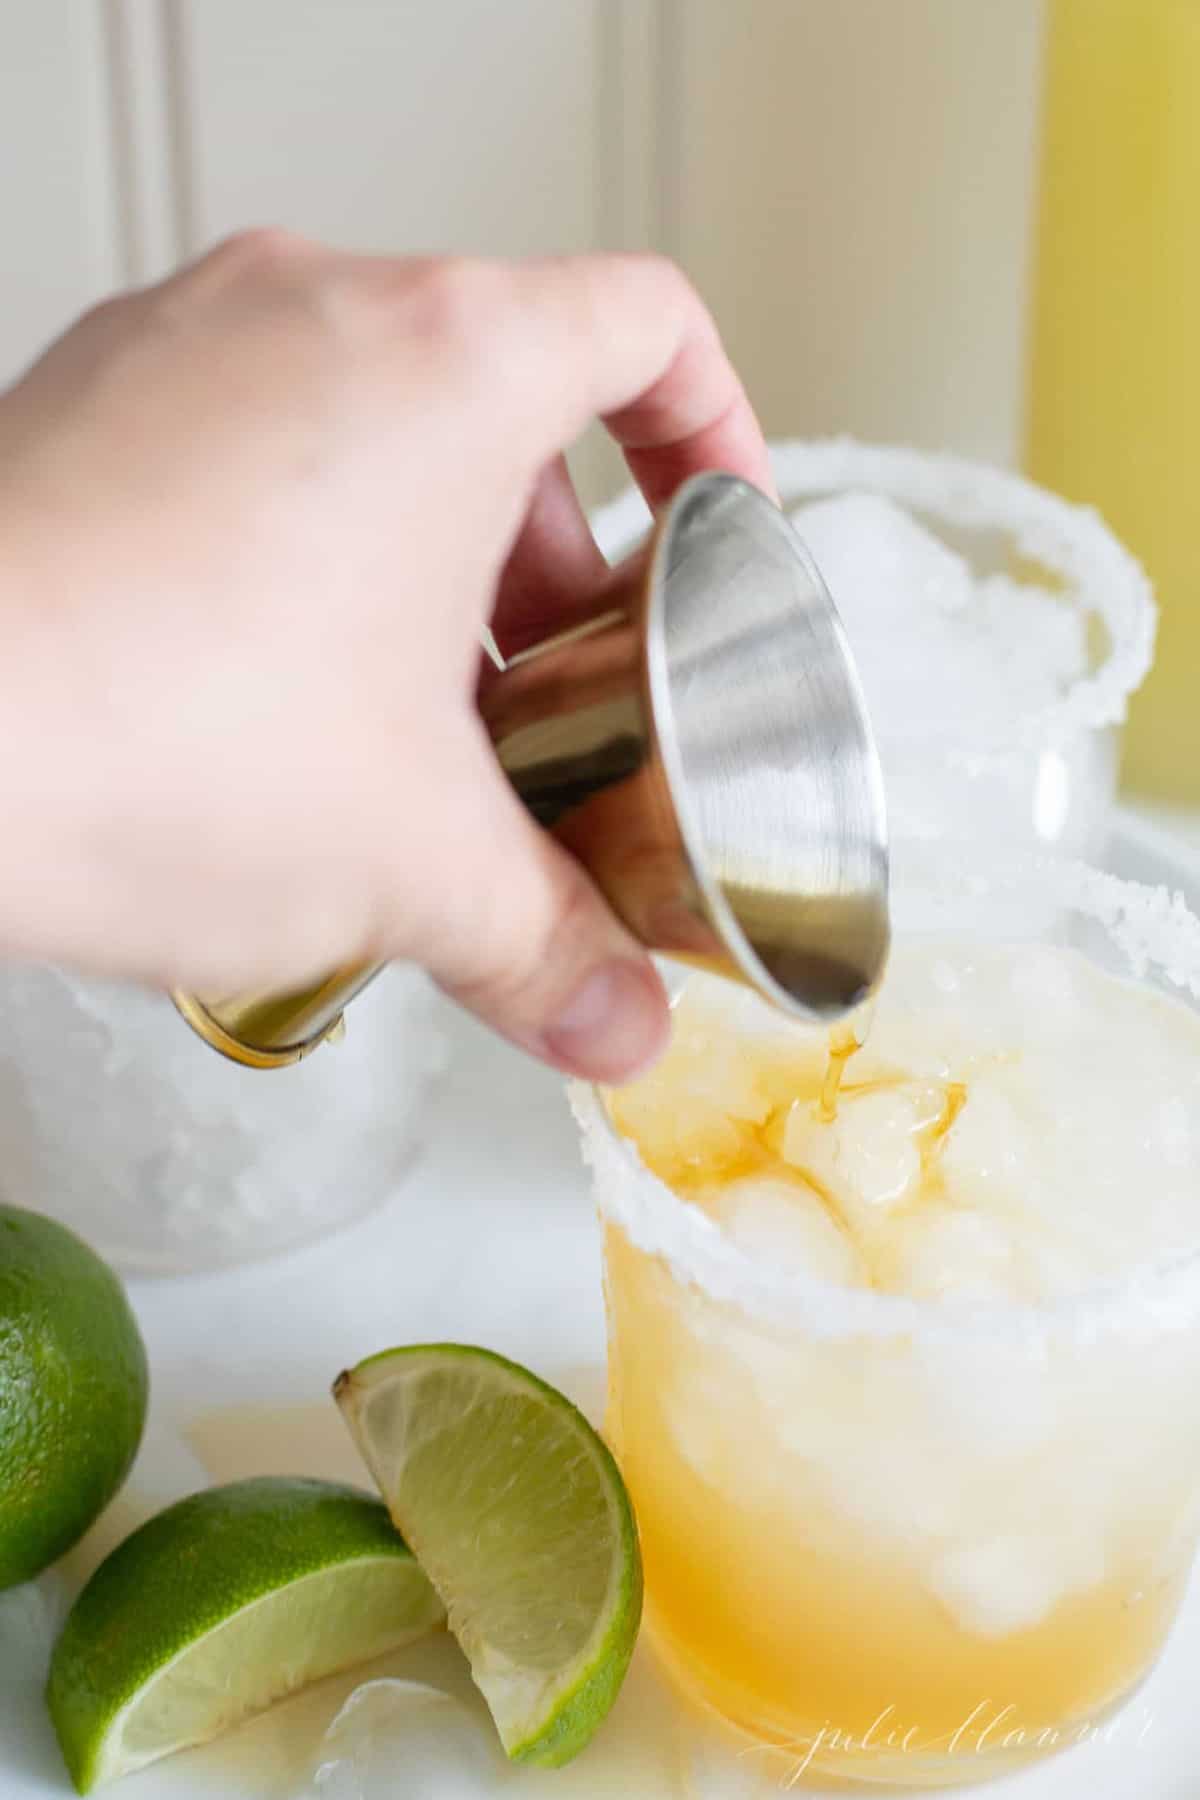 A hand pouring liquor into a glass of a made from scratch margarita.